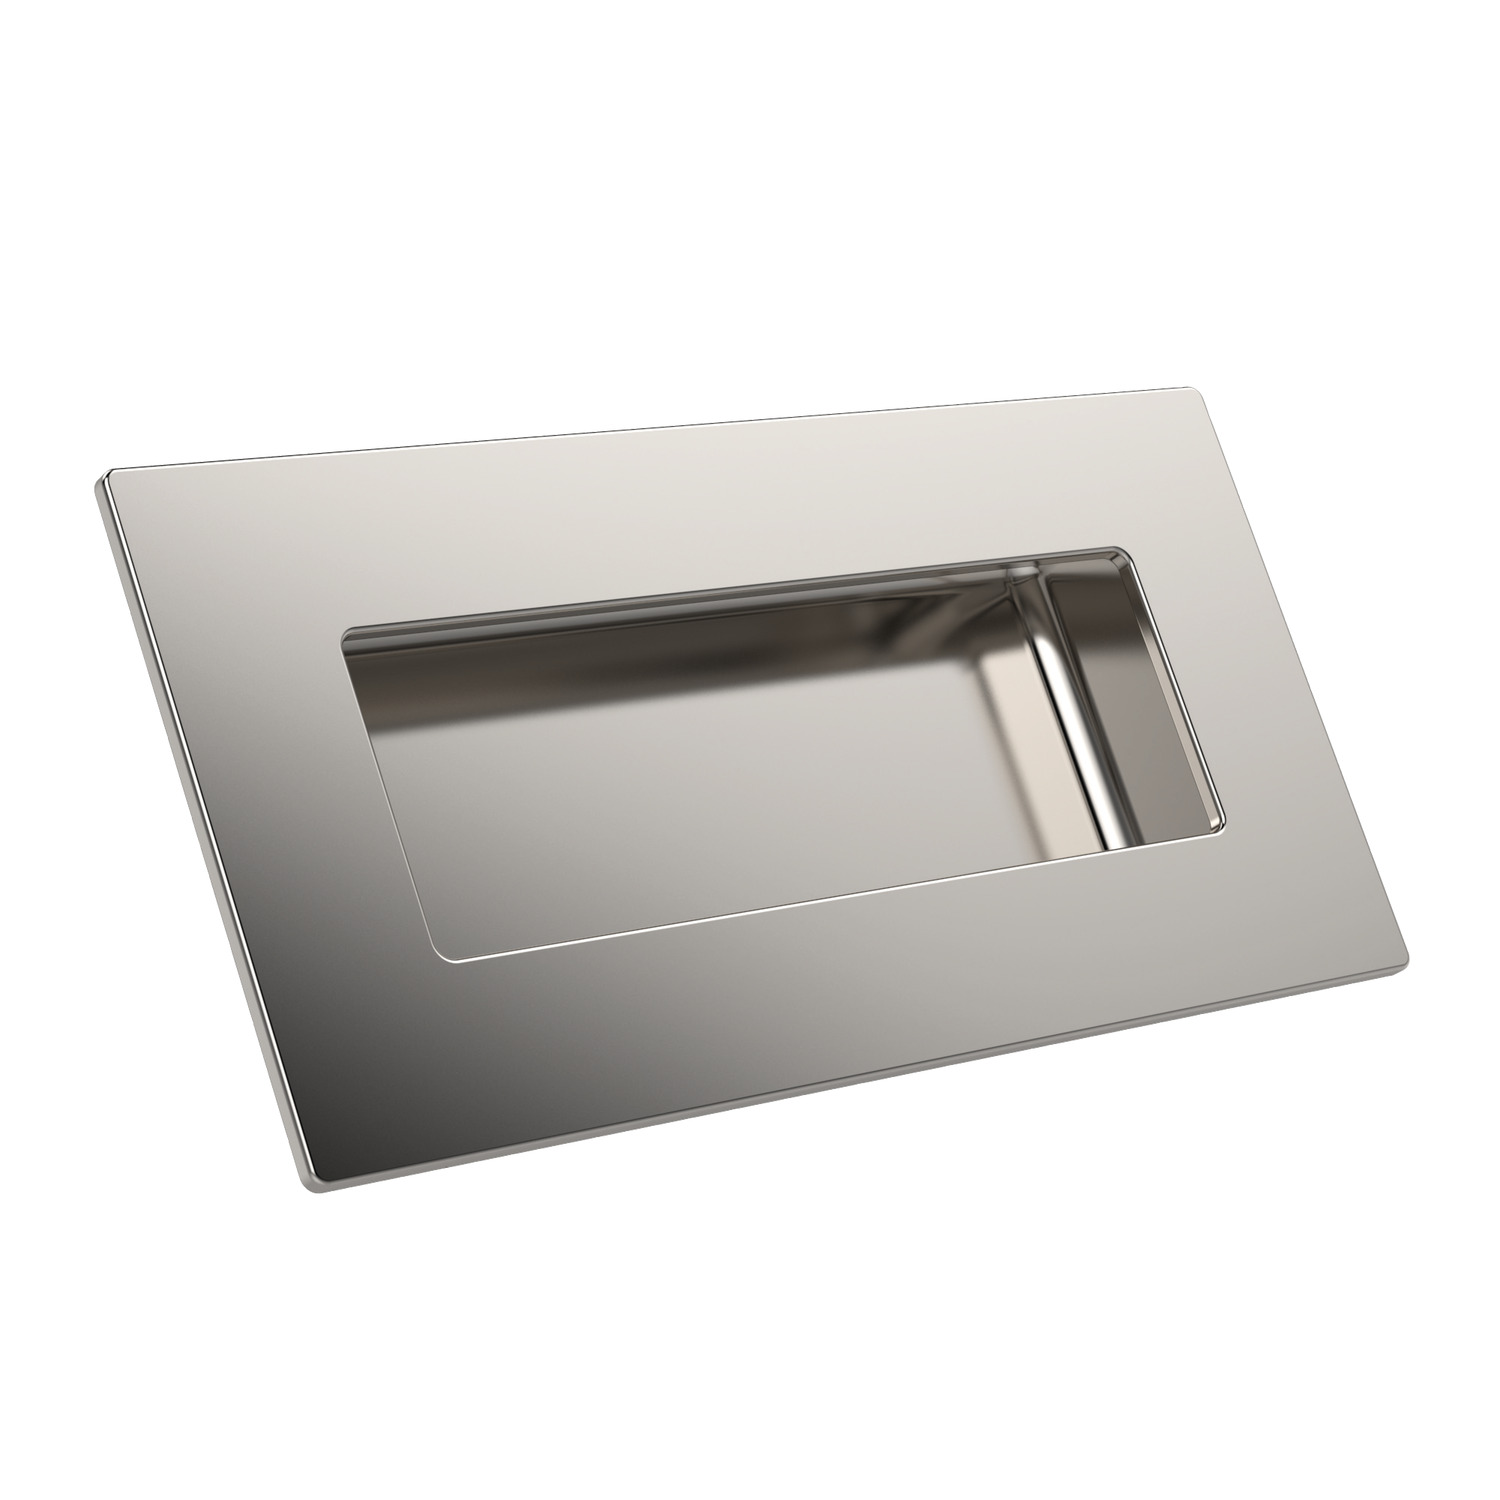 Product 79480, Pull Handles - Recessed stainless steel - rear mounting / 